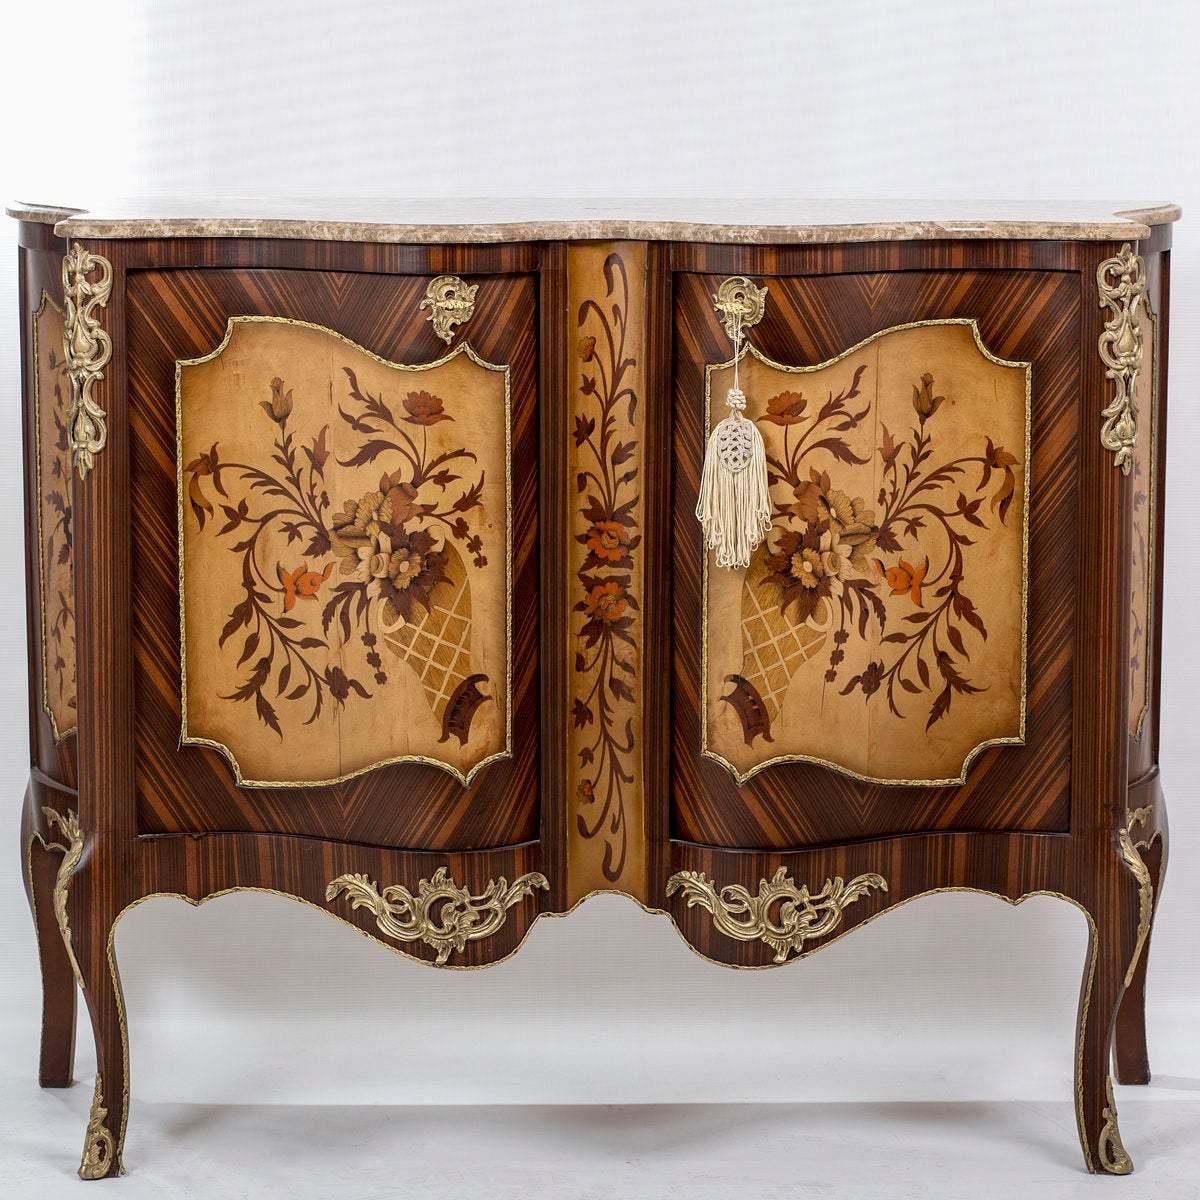 A stunning Louis XV commode, marble top, 20th century.

The vintage looking Louis XV commode is inspired by the 18th century. It is made of natural beechwood and beautifully designed with hand-drawings that are inspired from iconic French